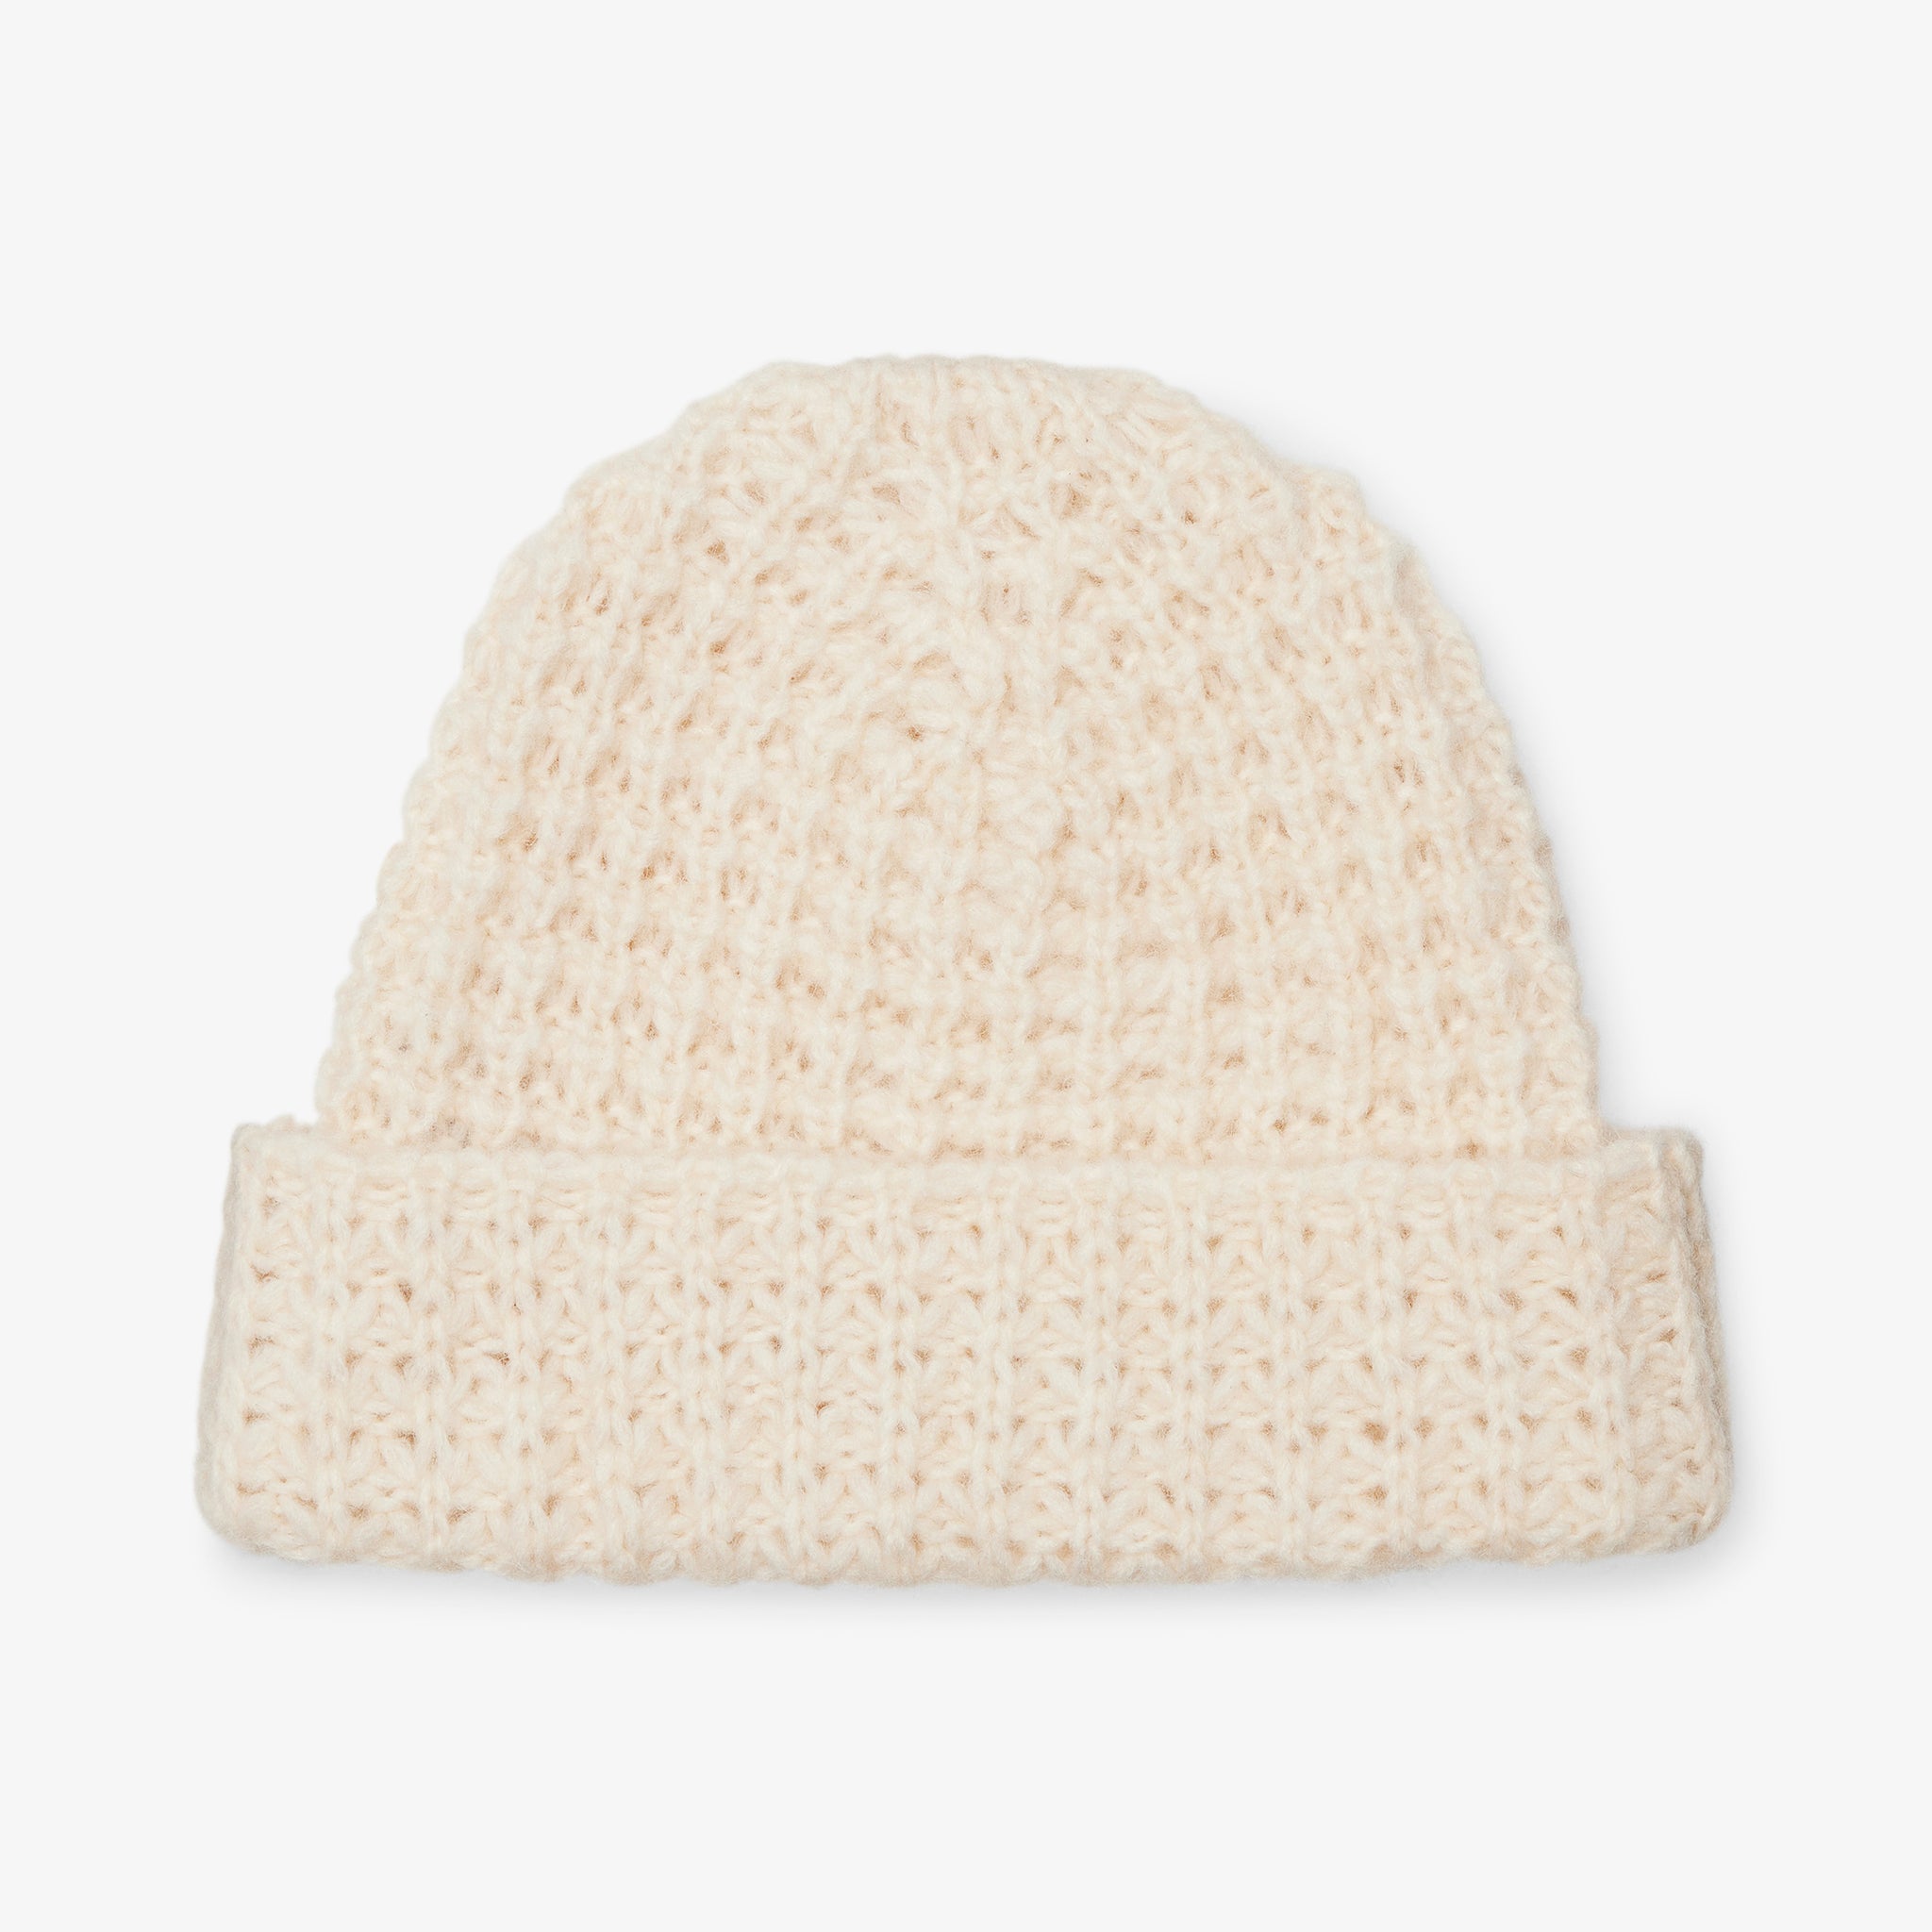 Packshot image of the beanie in ivory 